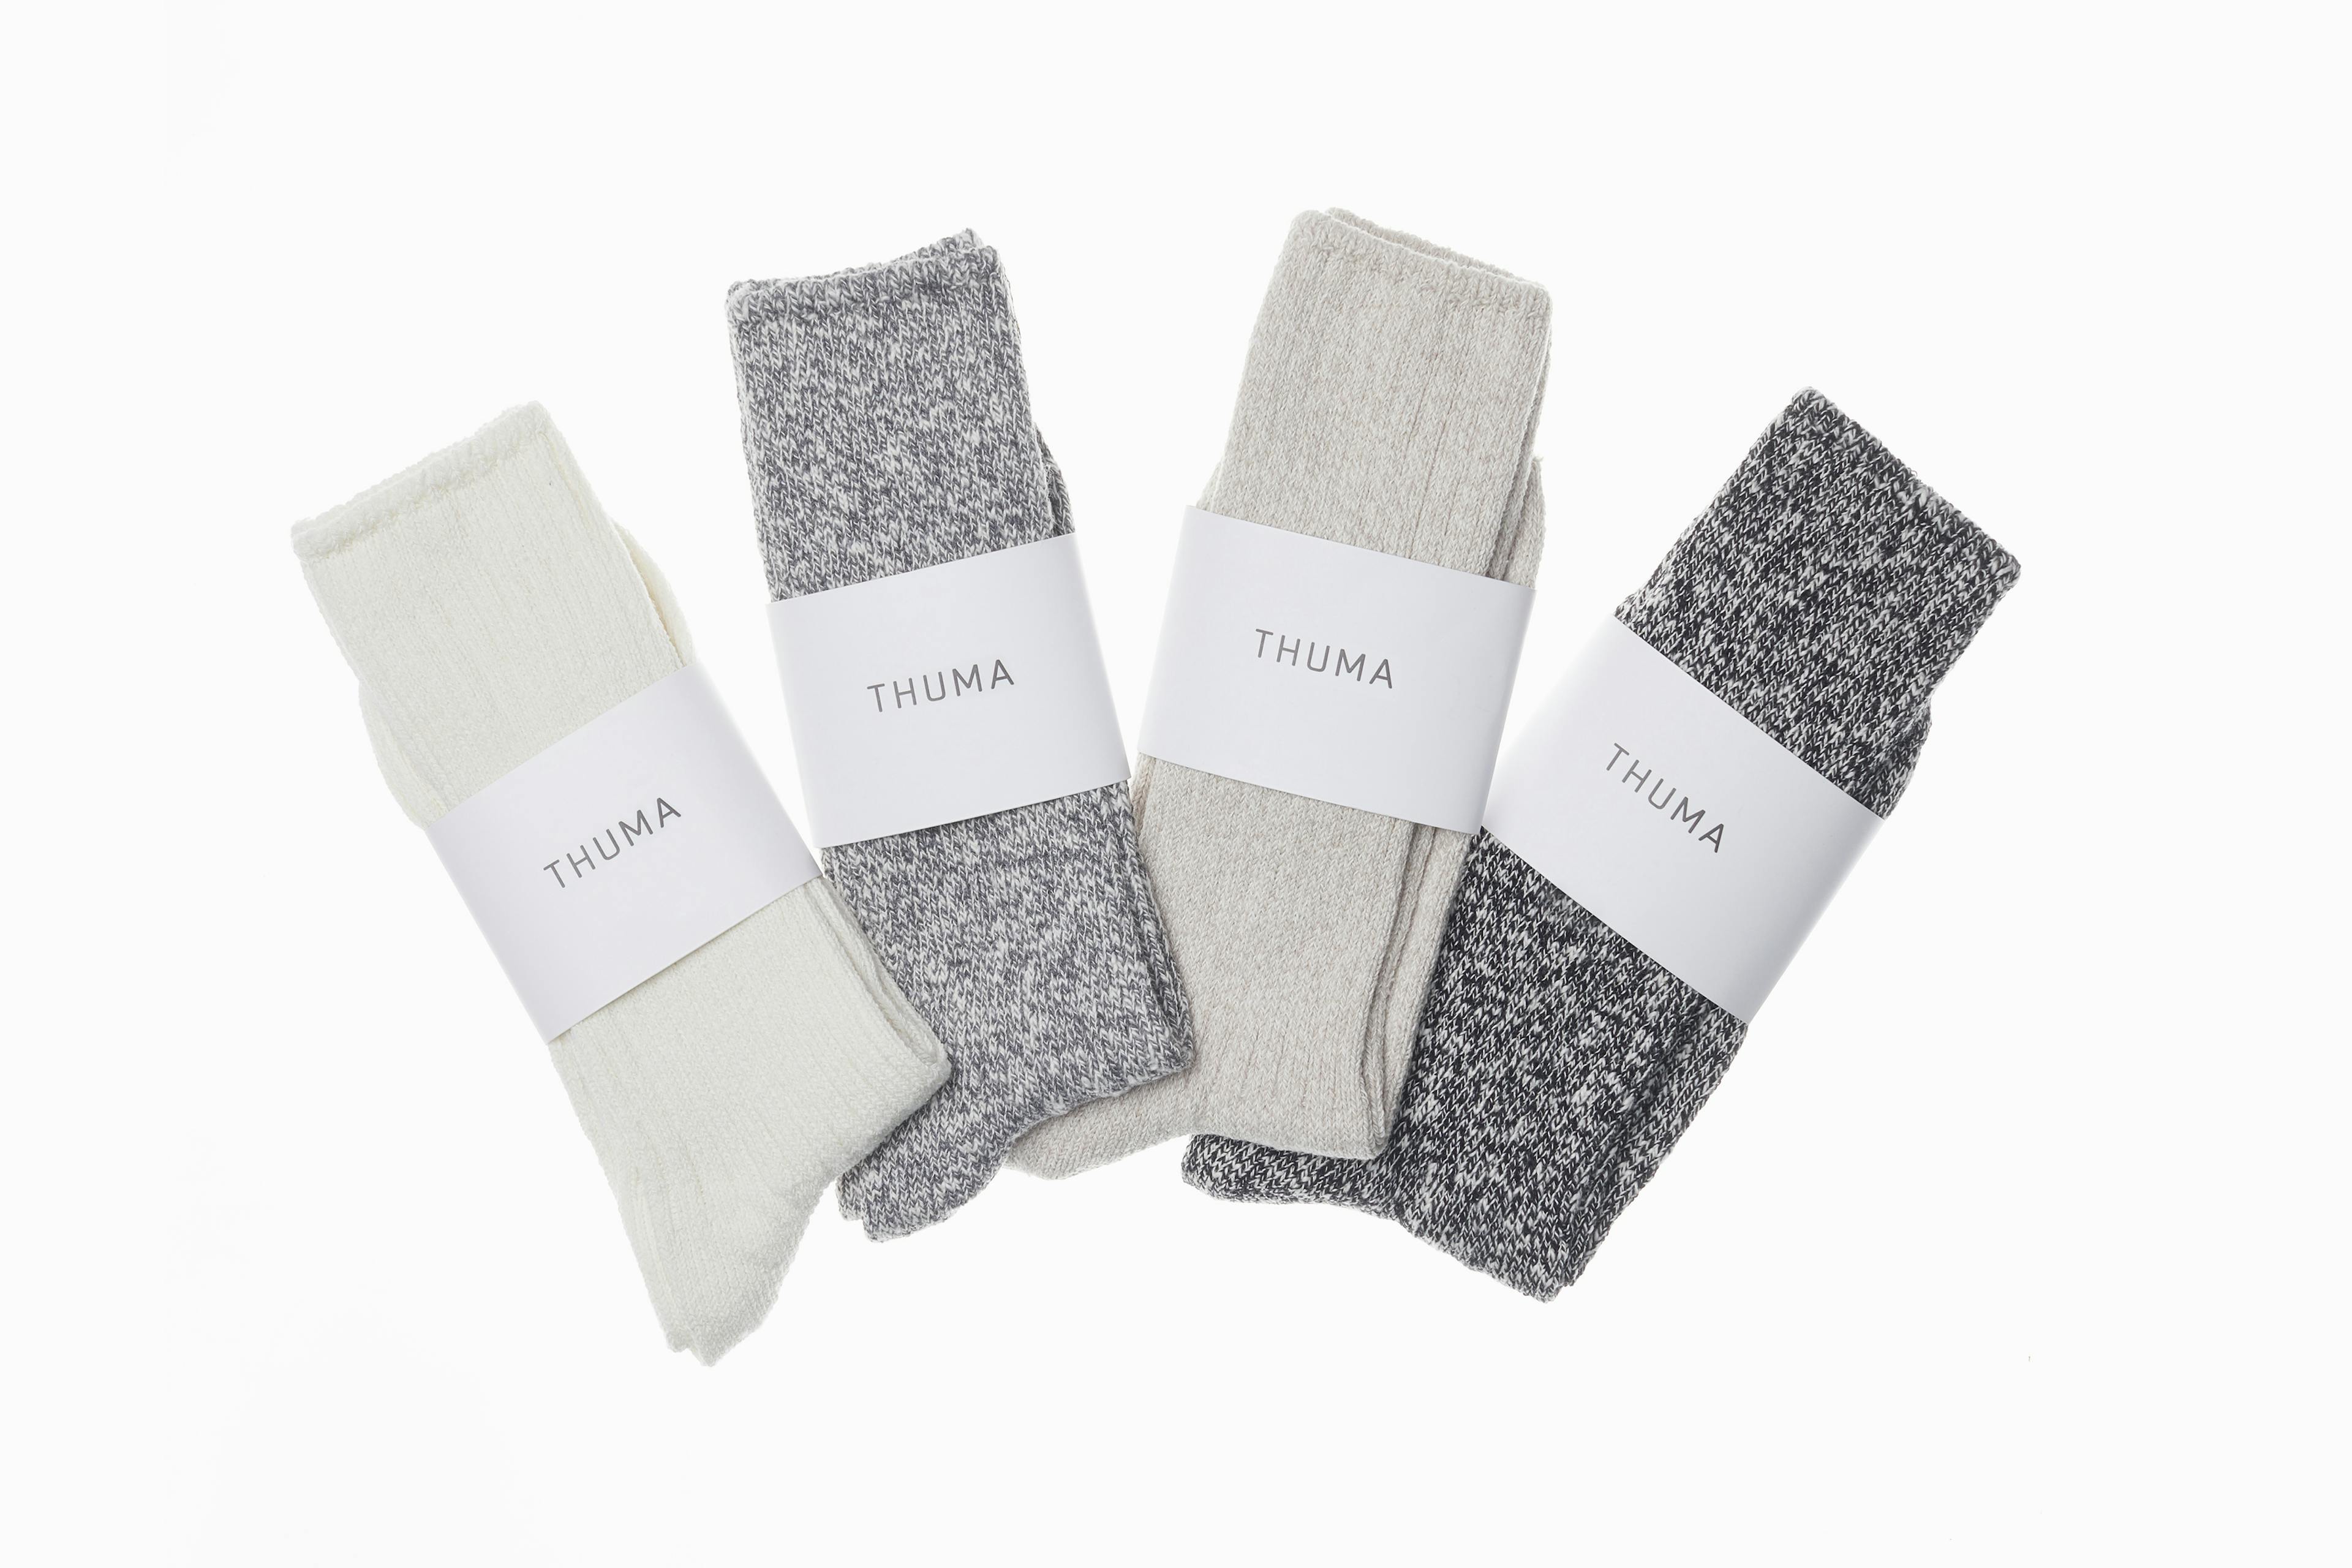 Lounge & Leisure Socks in Natural White Color Spread Out